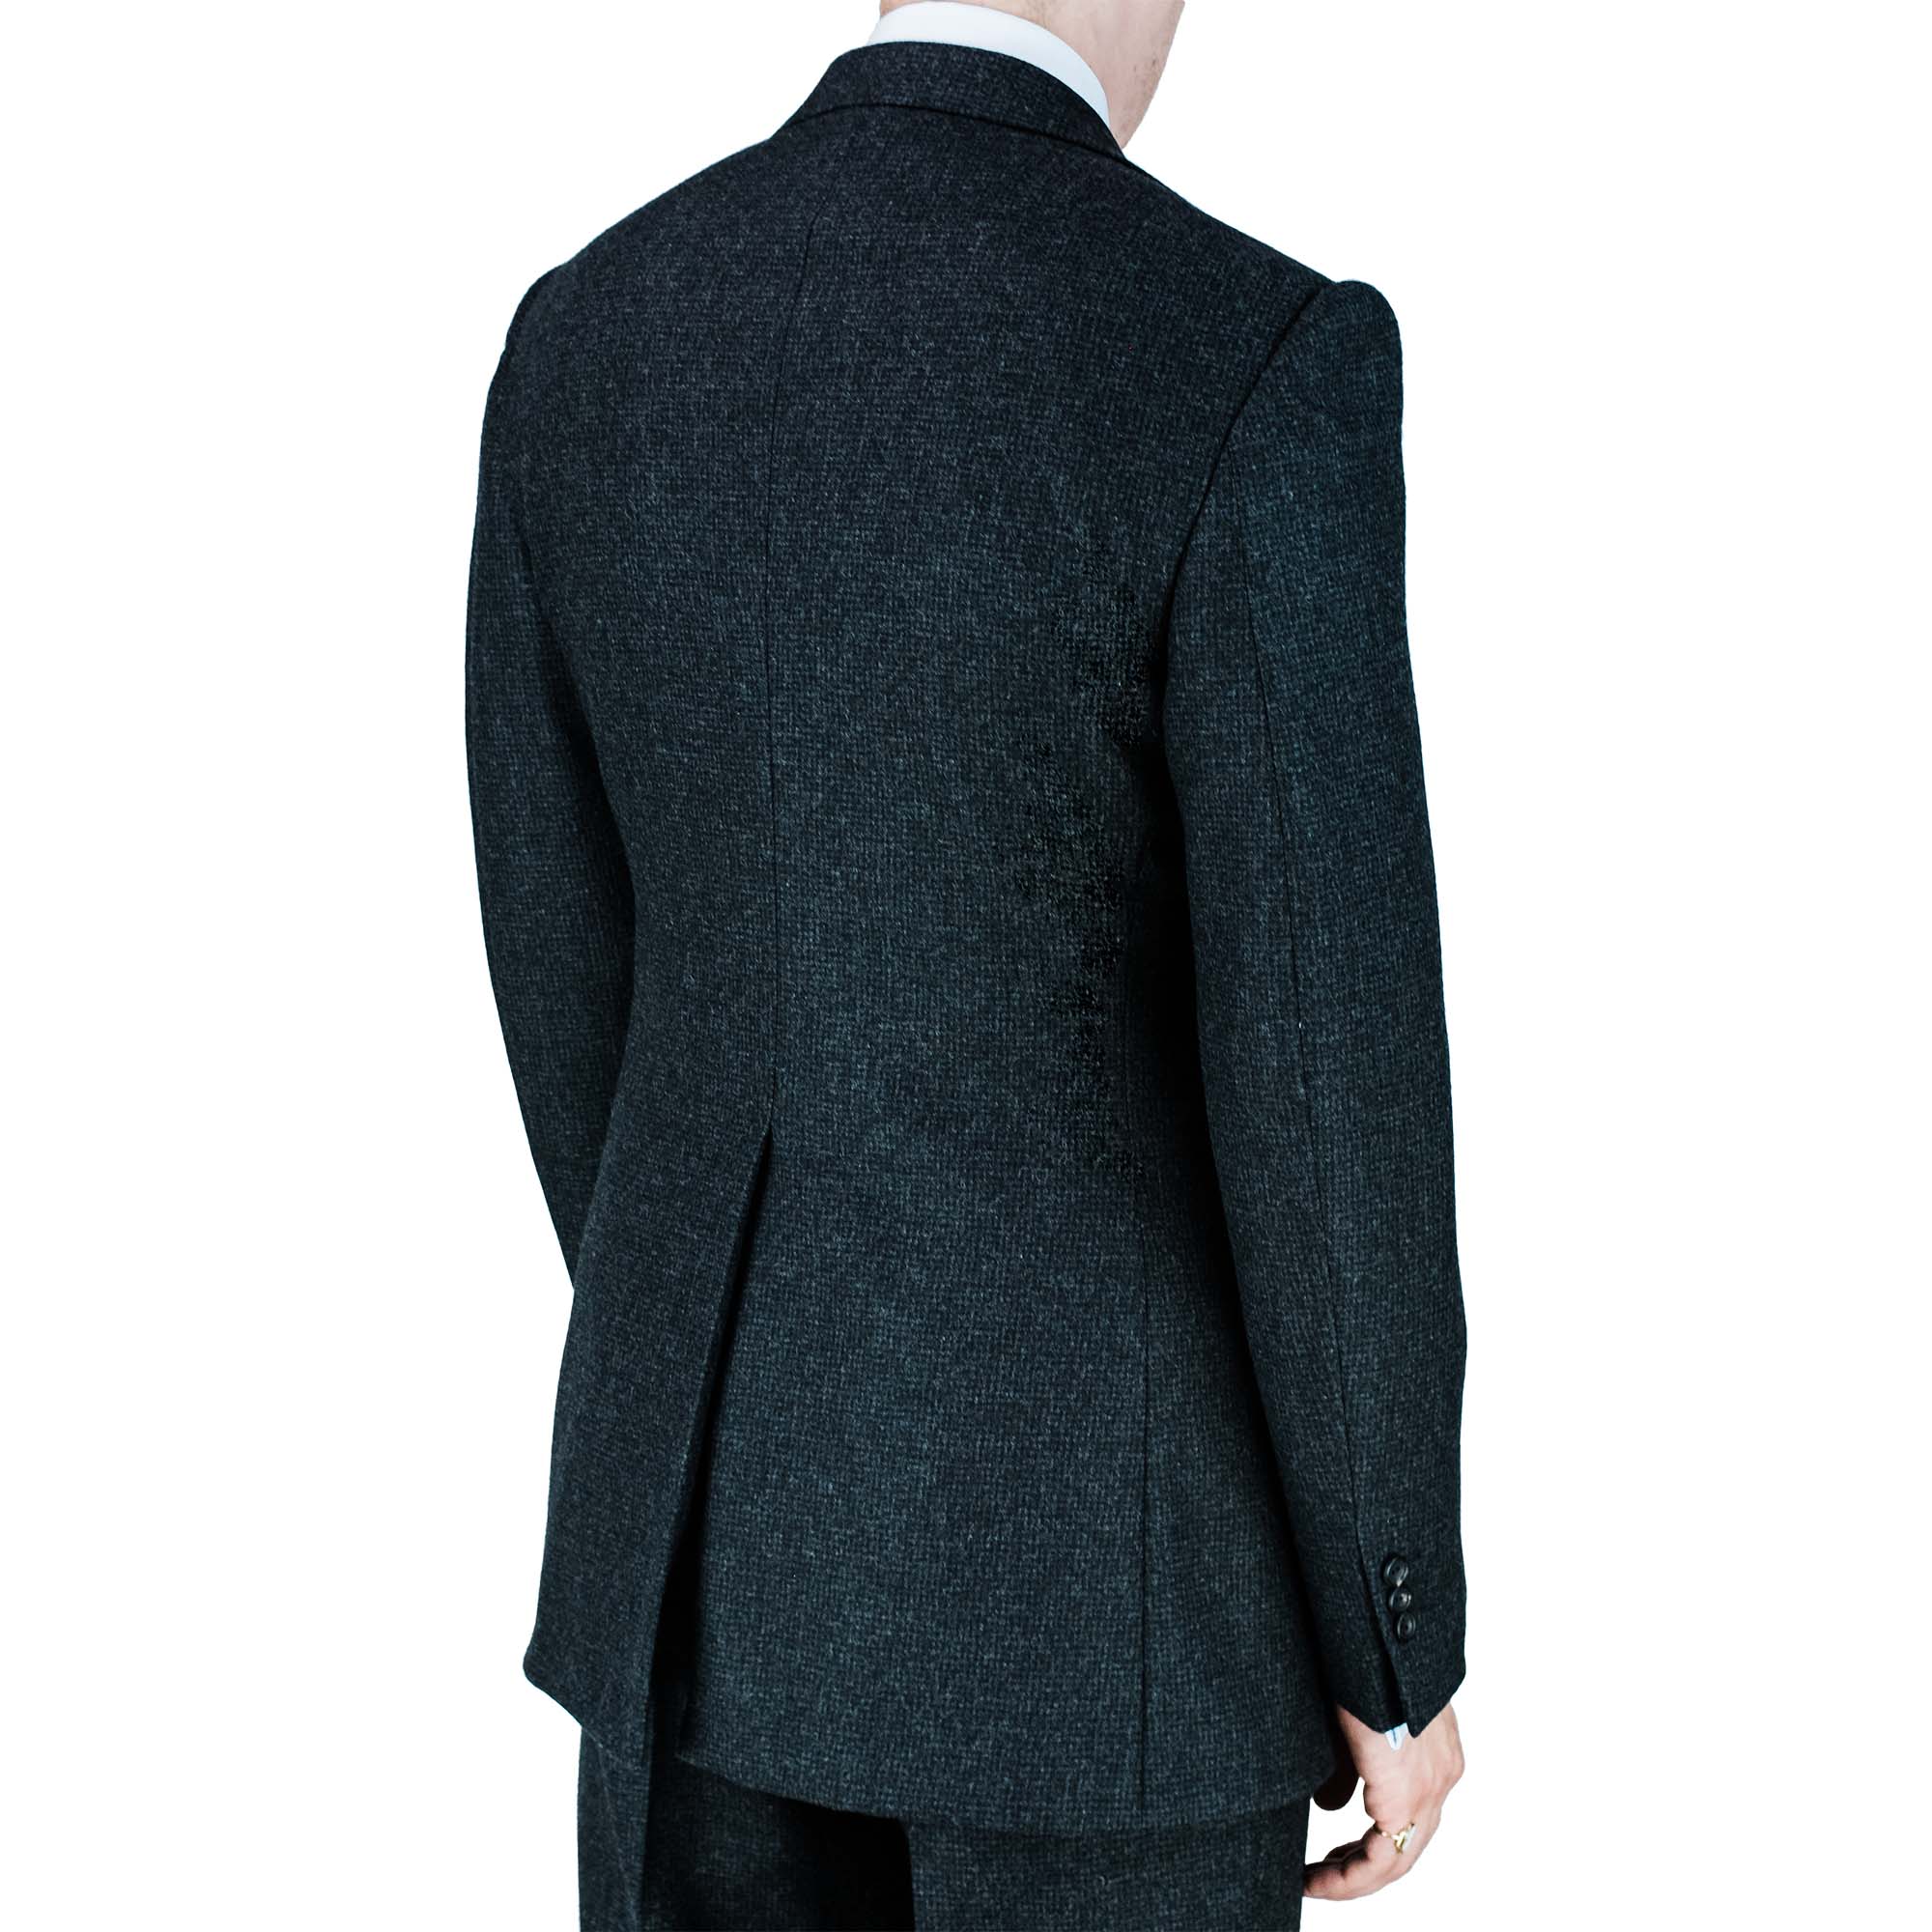 Suit - charcoal puppytooth flannel